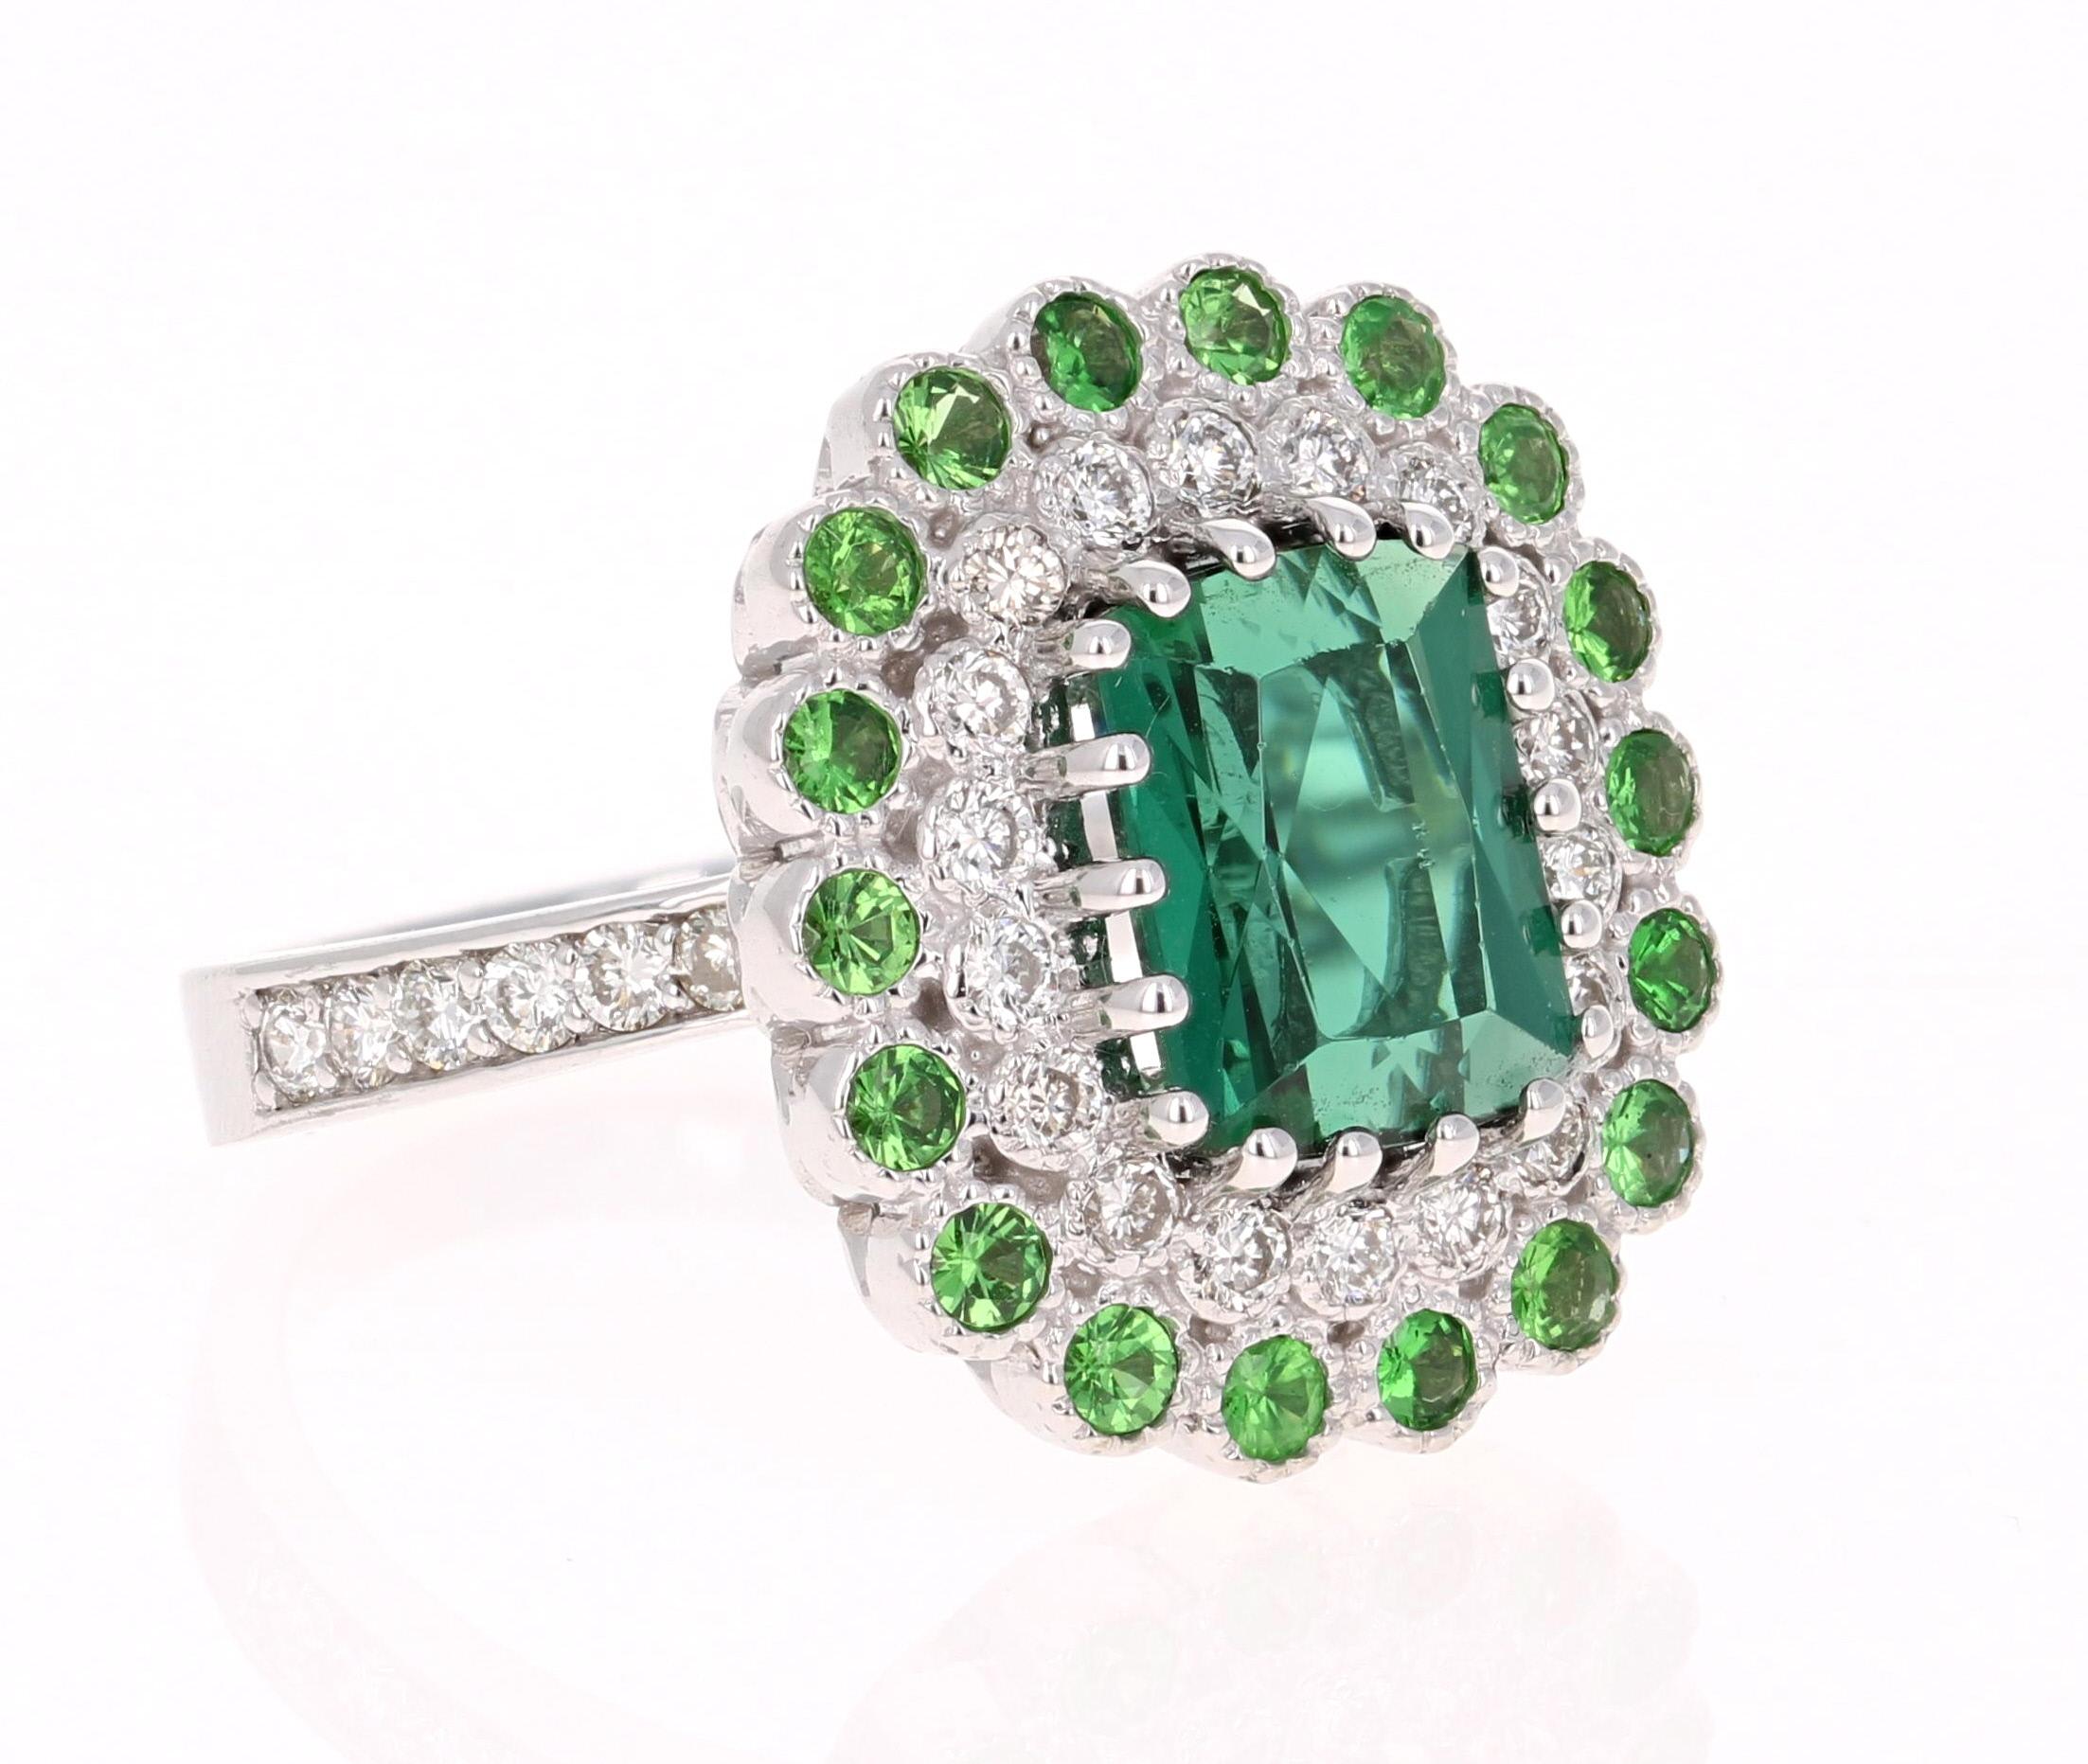 Gorgeous is an under-statement for this beauty! 

This ring has a Emerald Cut Green Tourmaline that weighs 2.81 Carats. Floating around the tourmaline are 30 Round Cut Diamonds weighing 0.65 Carats. (VS/H) 
Alongside the Diamonds are bright and